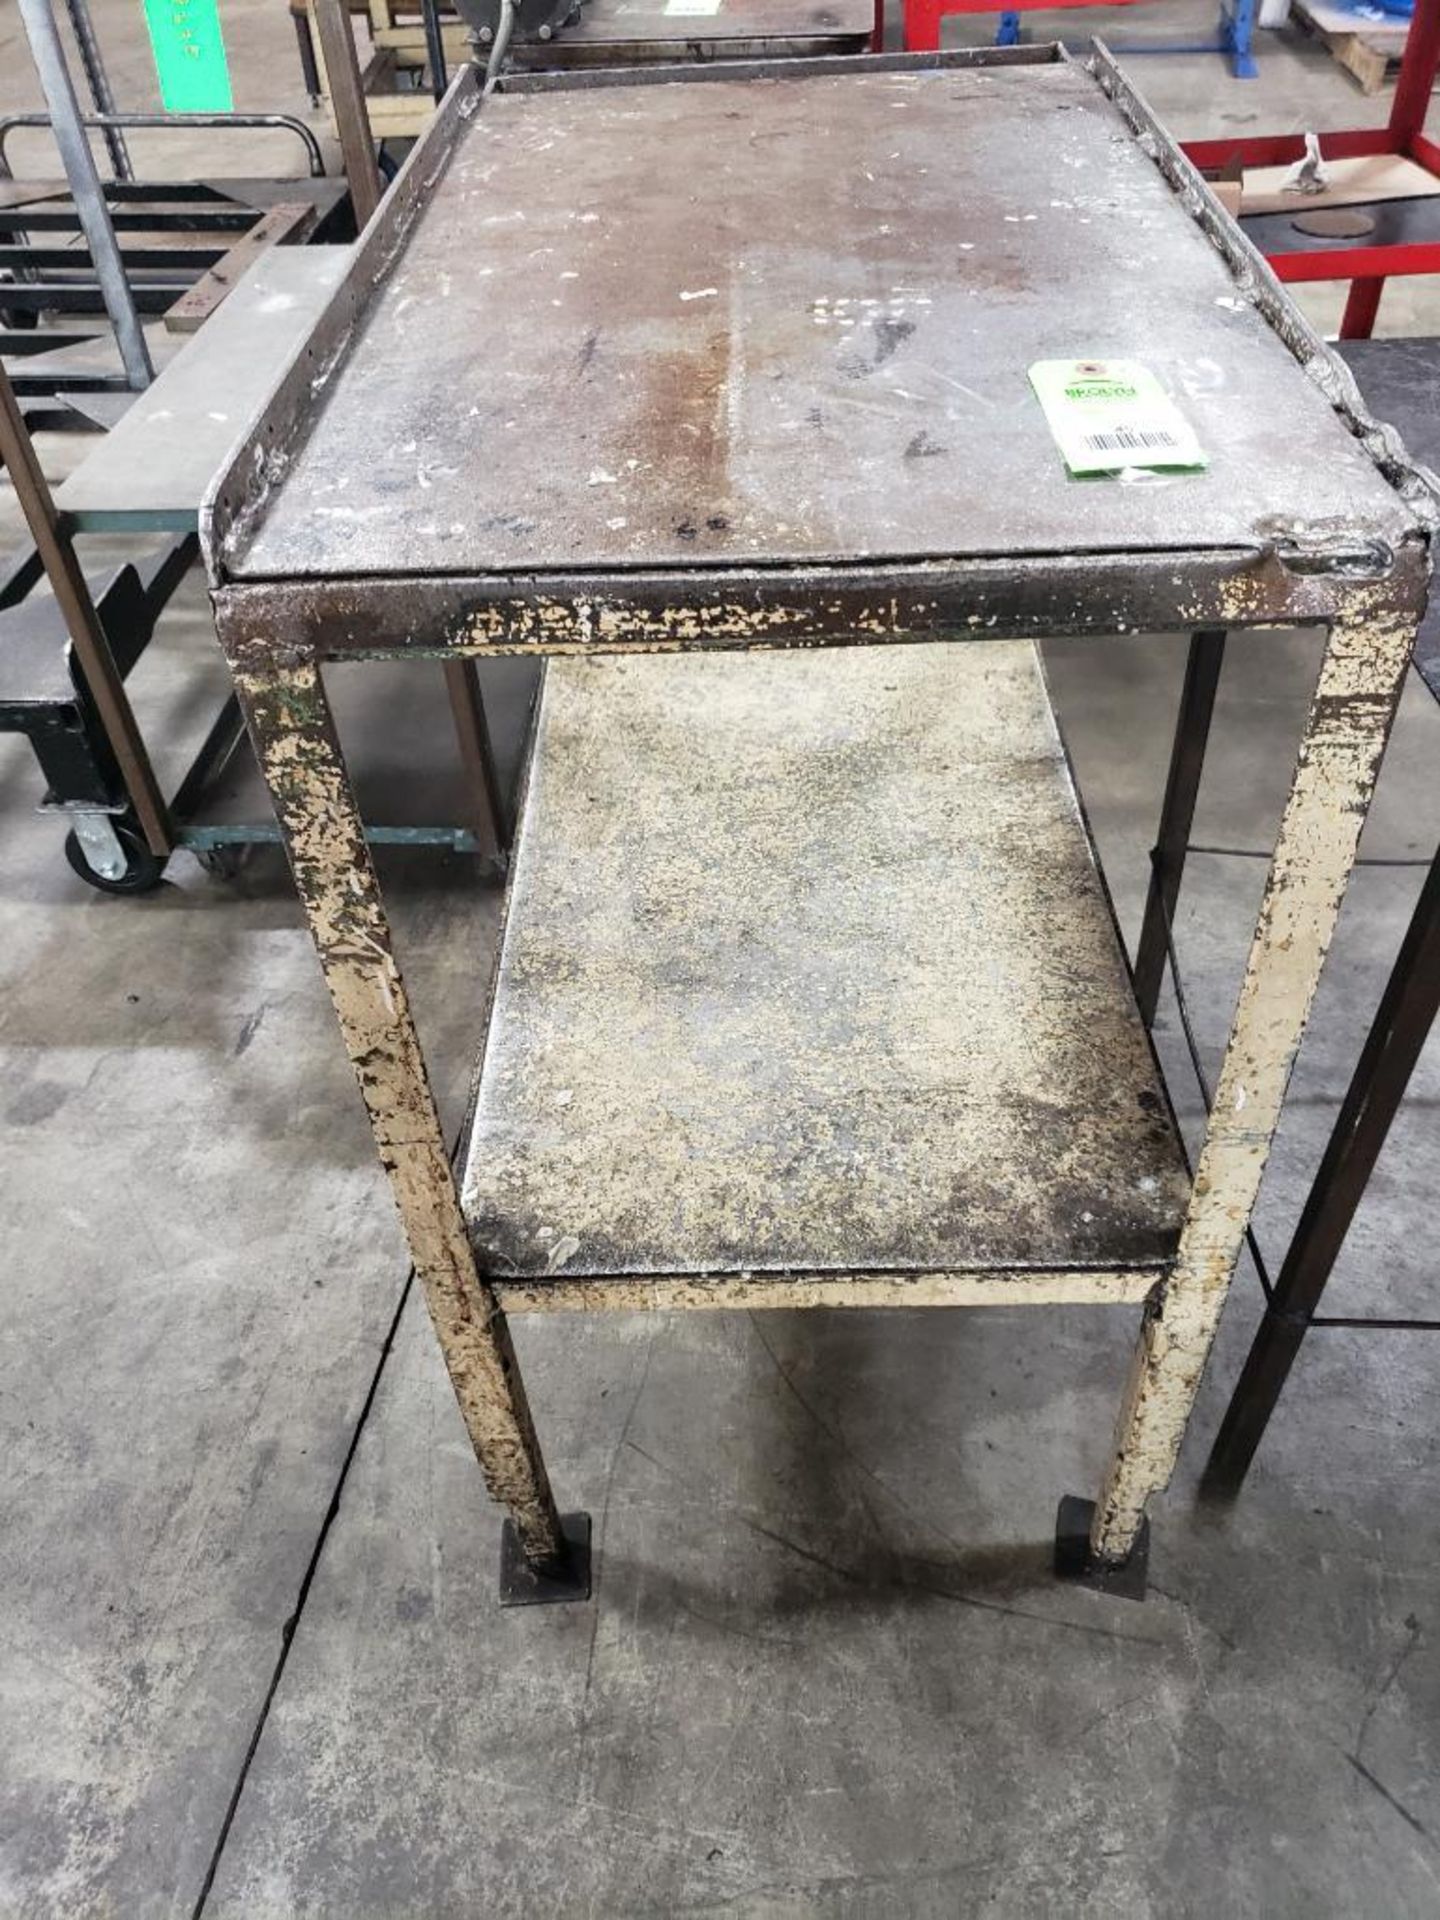 Qty 2 - Industrial work tables. 39x21x38, 24x24x30. LxWxH. - Image 2 of 6